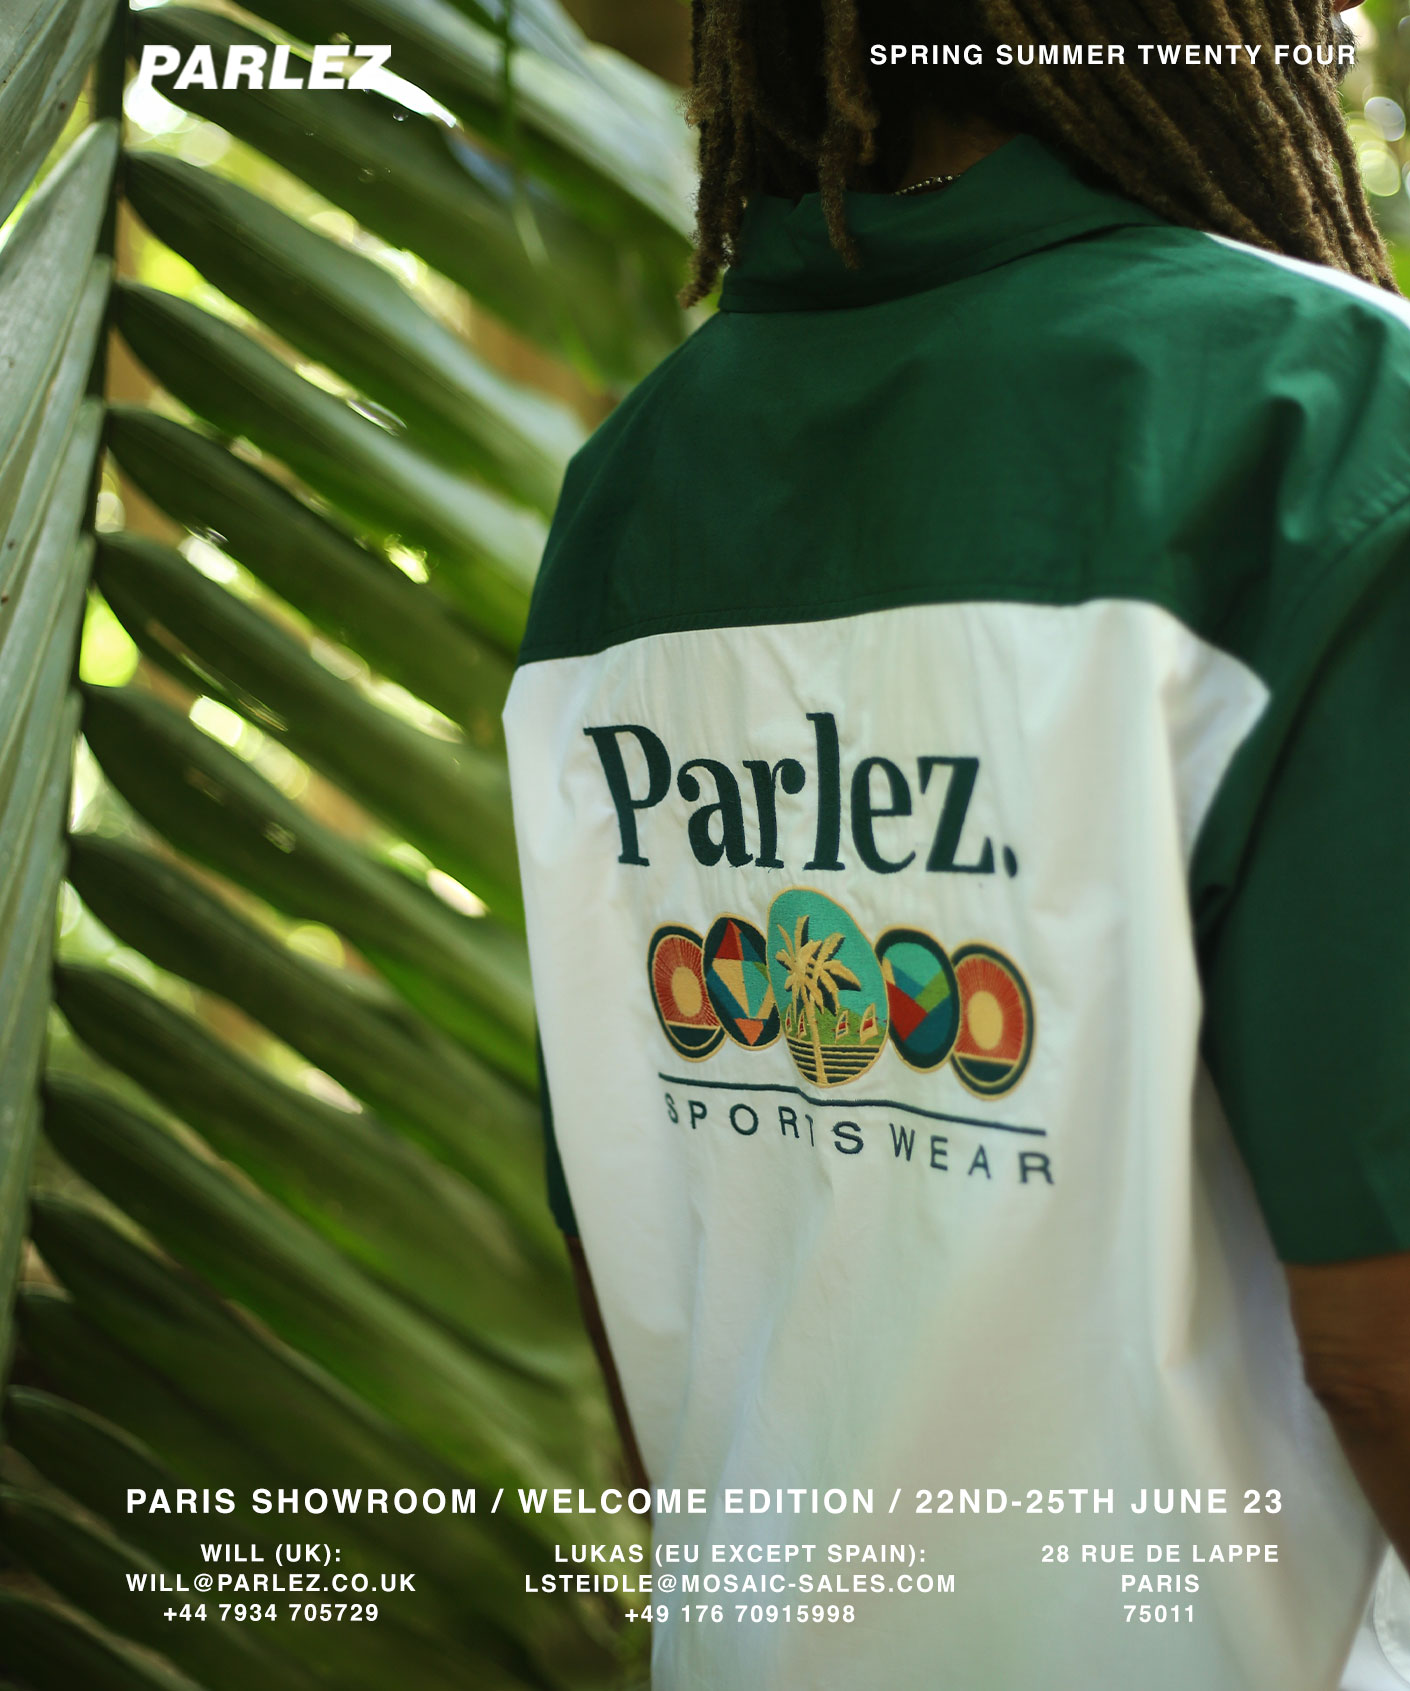 Digital flyer for this year’s Welcome Edition trade show 2023, showing a green Parlez jacket in front of palm trees along with dates for the event.